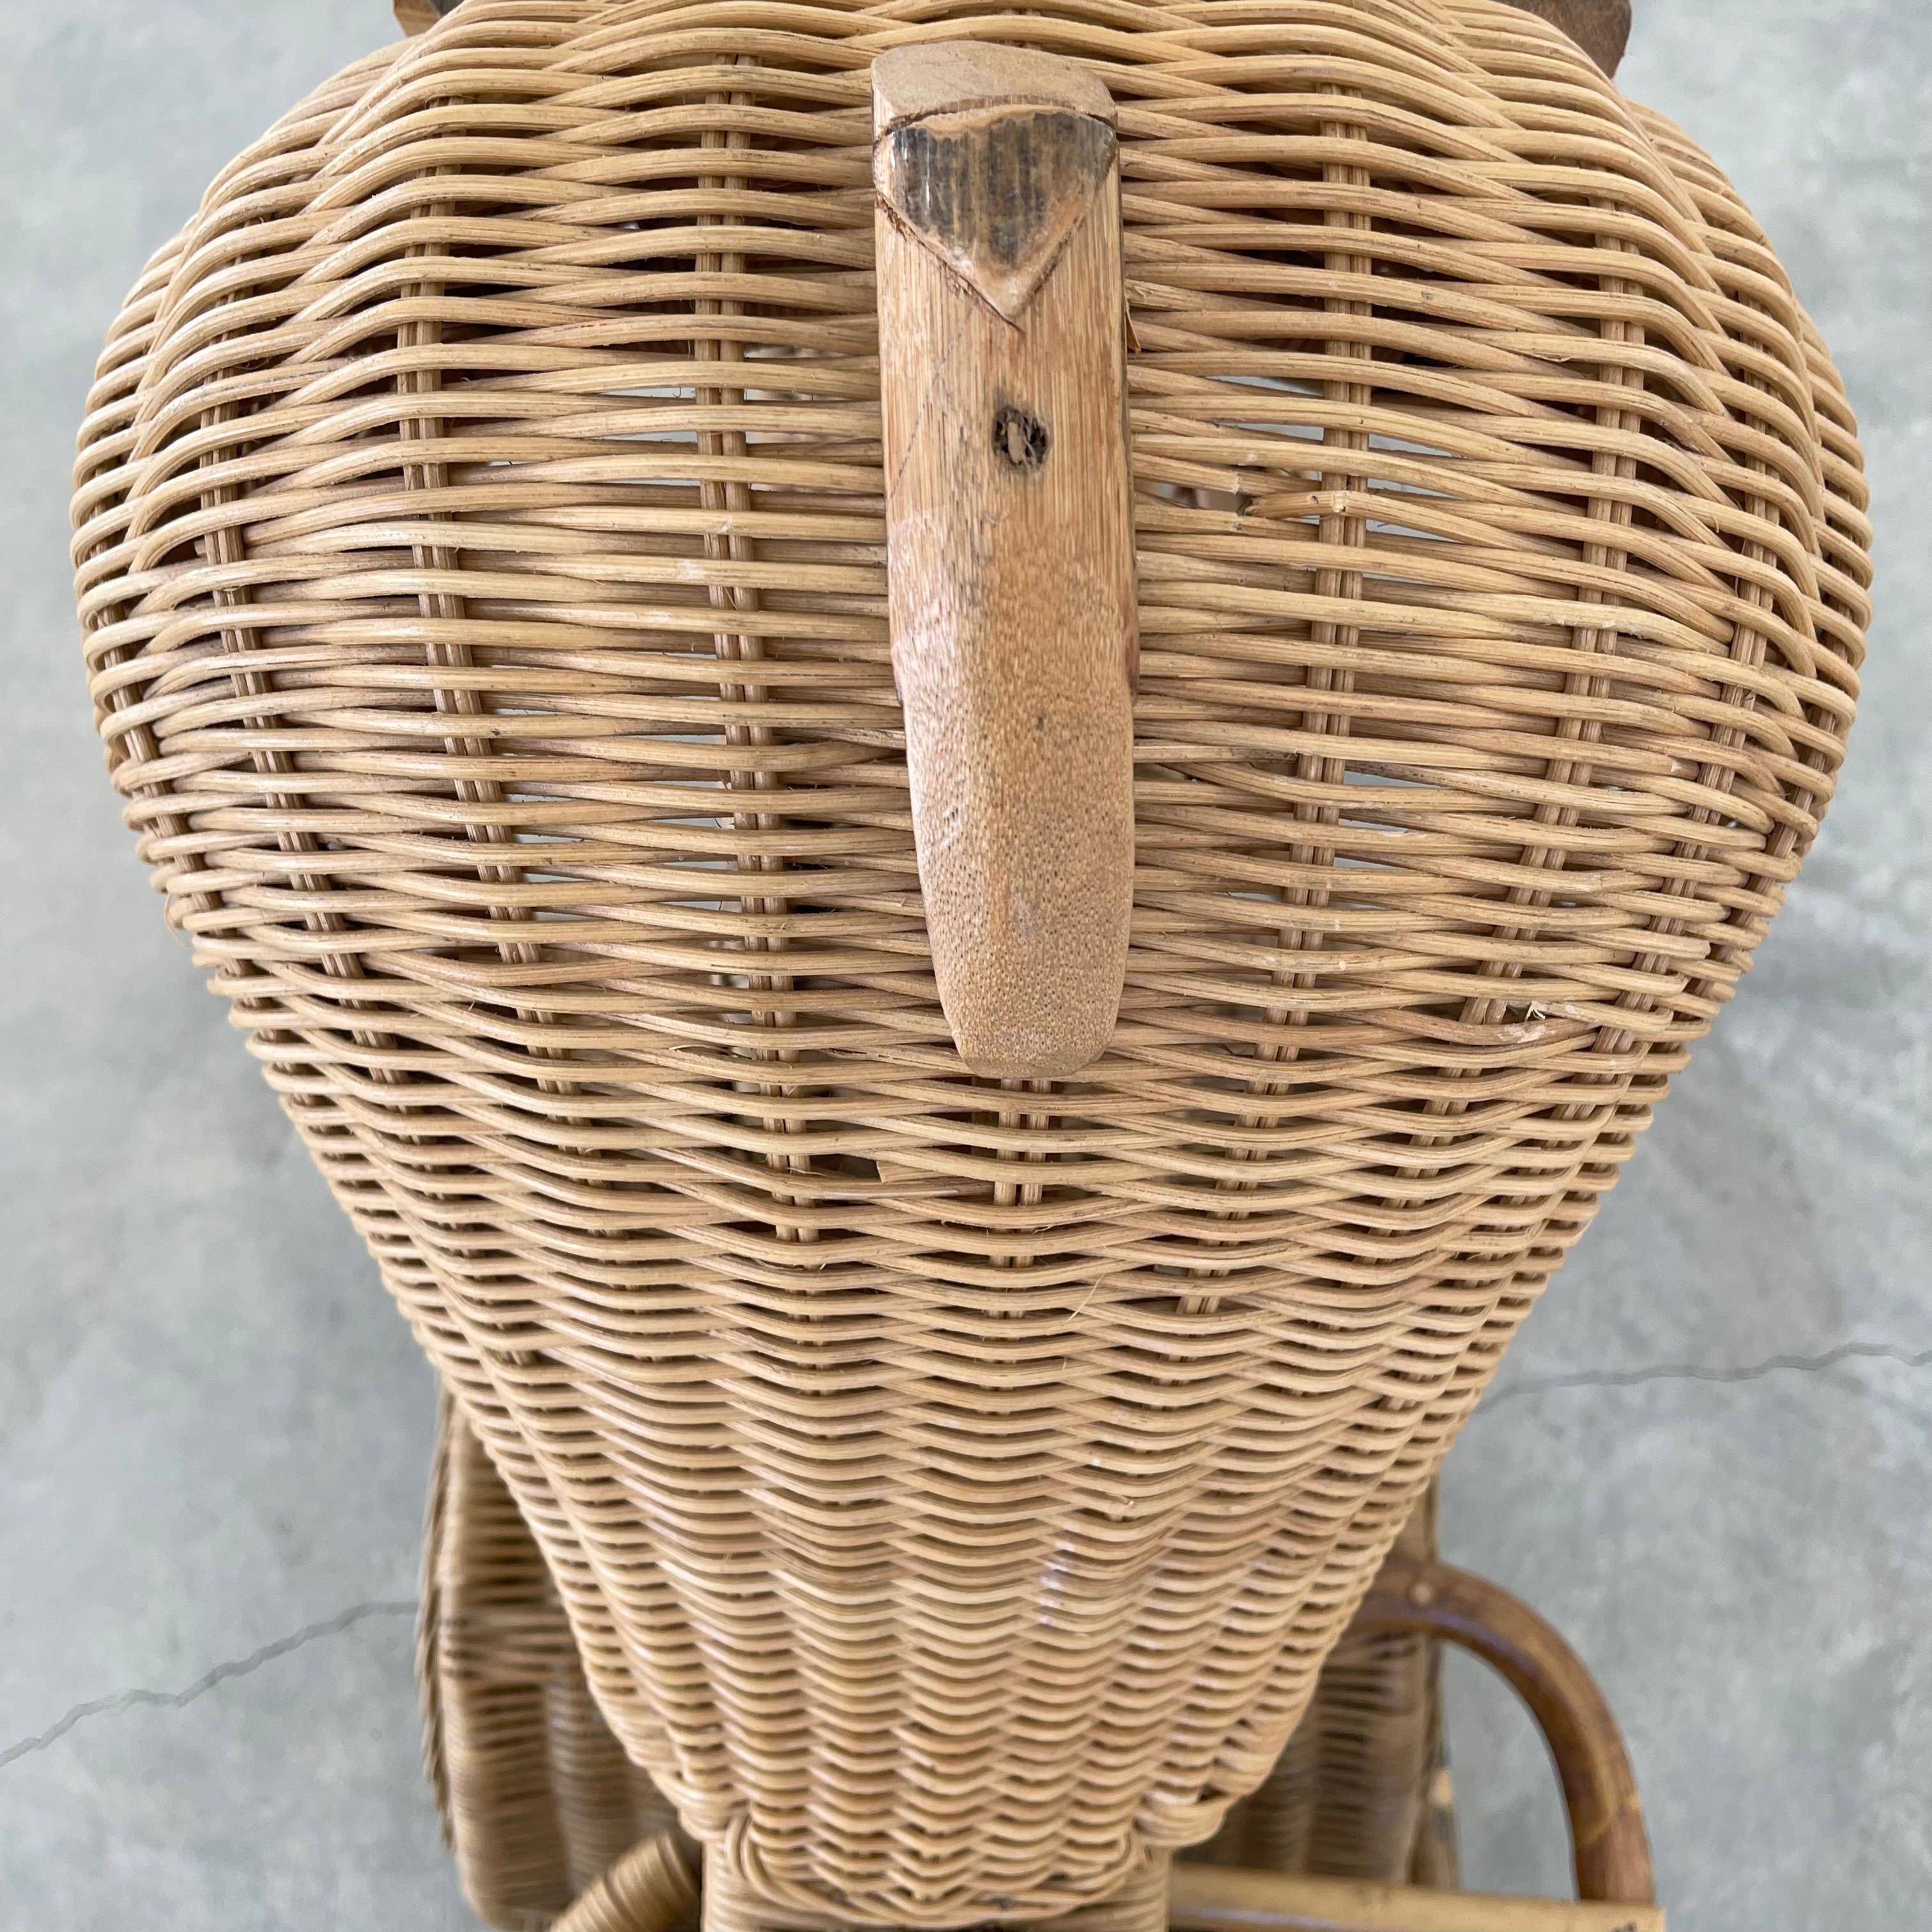 Massive Rattan, Bamboo and Wicker Harley Davidson Motorcycle For Sale 3